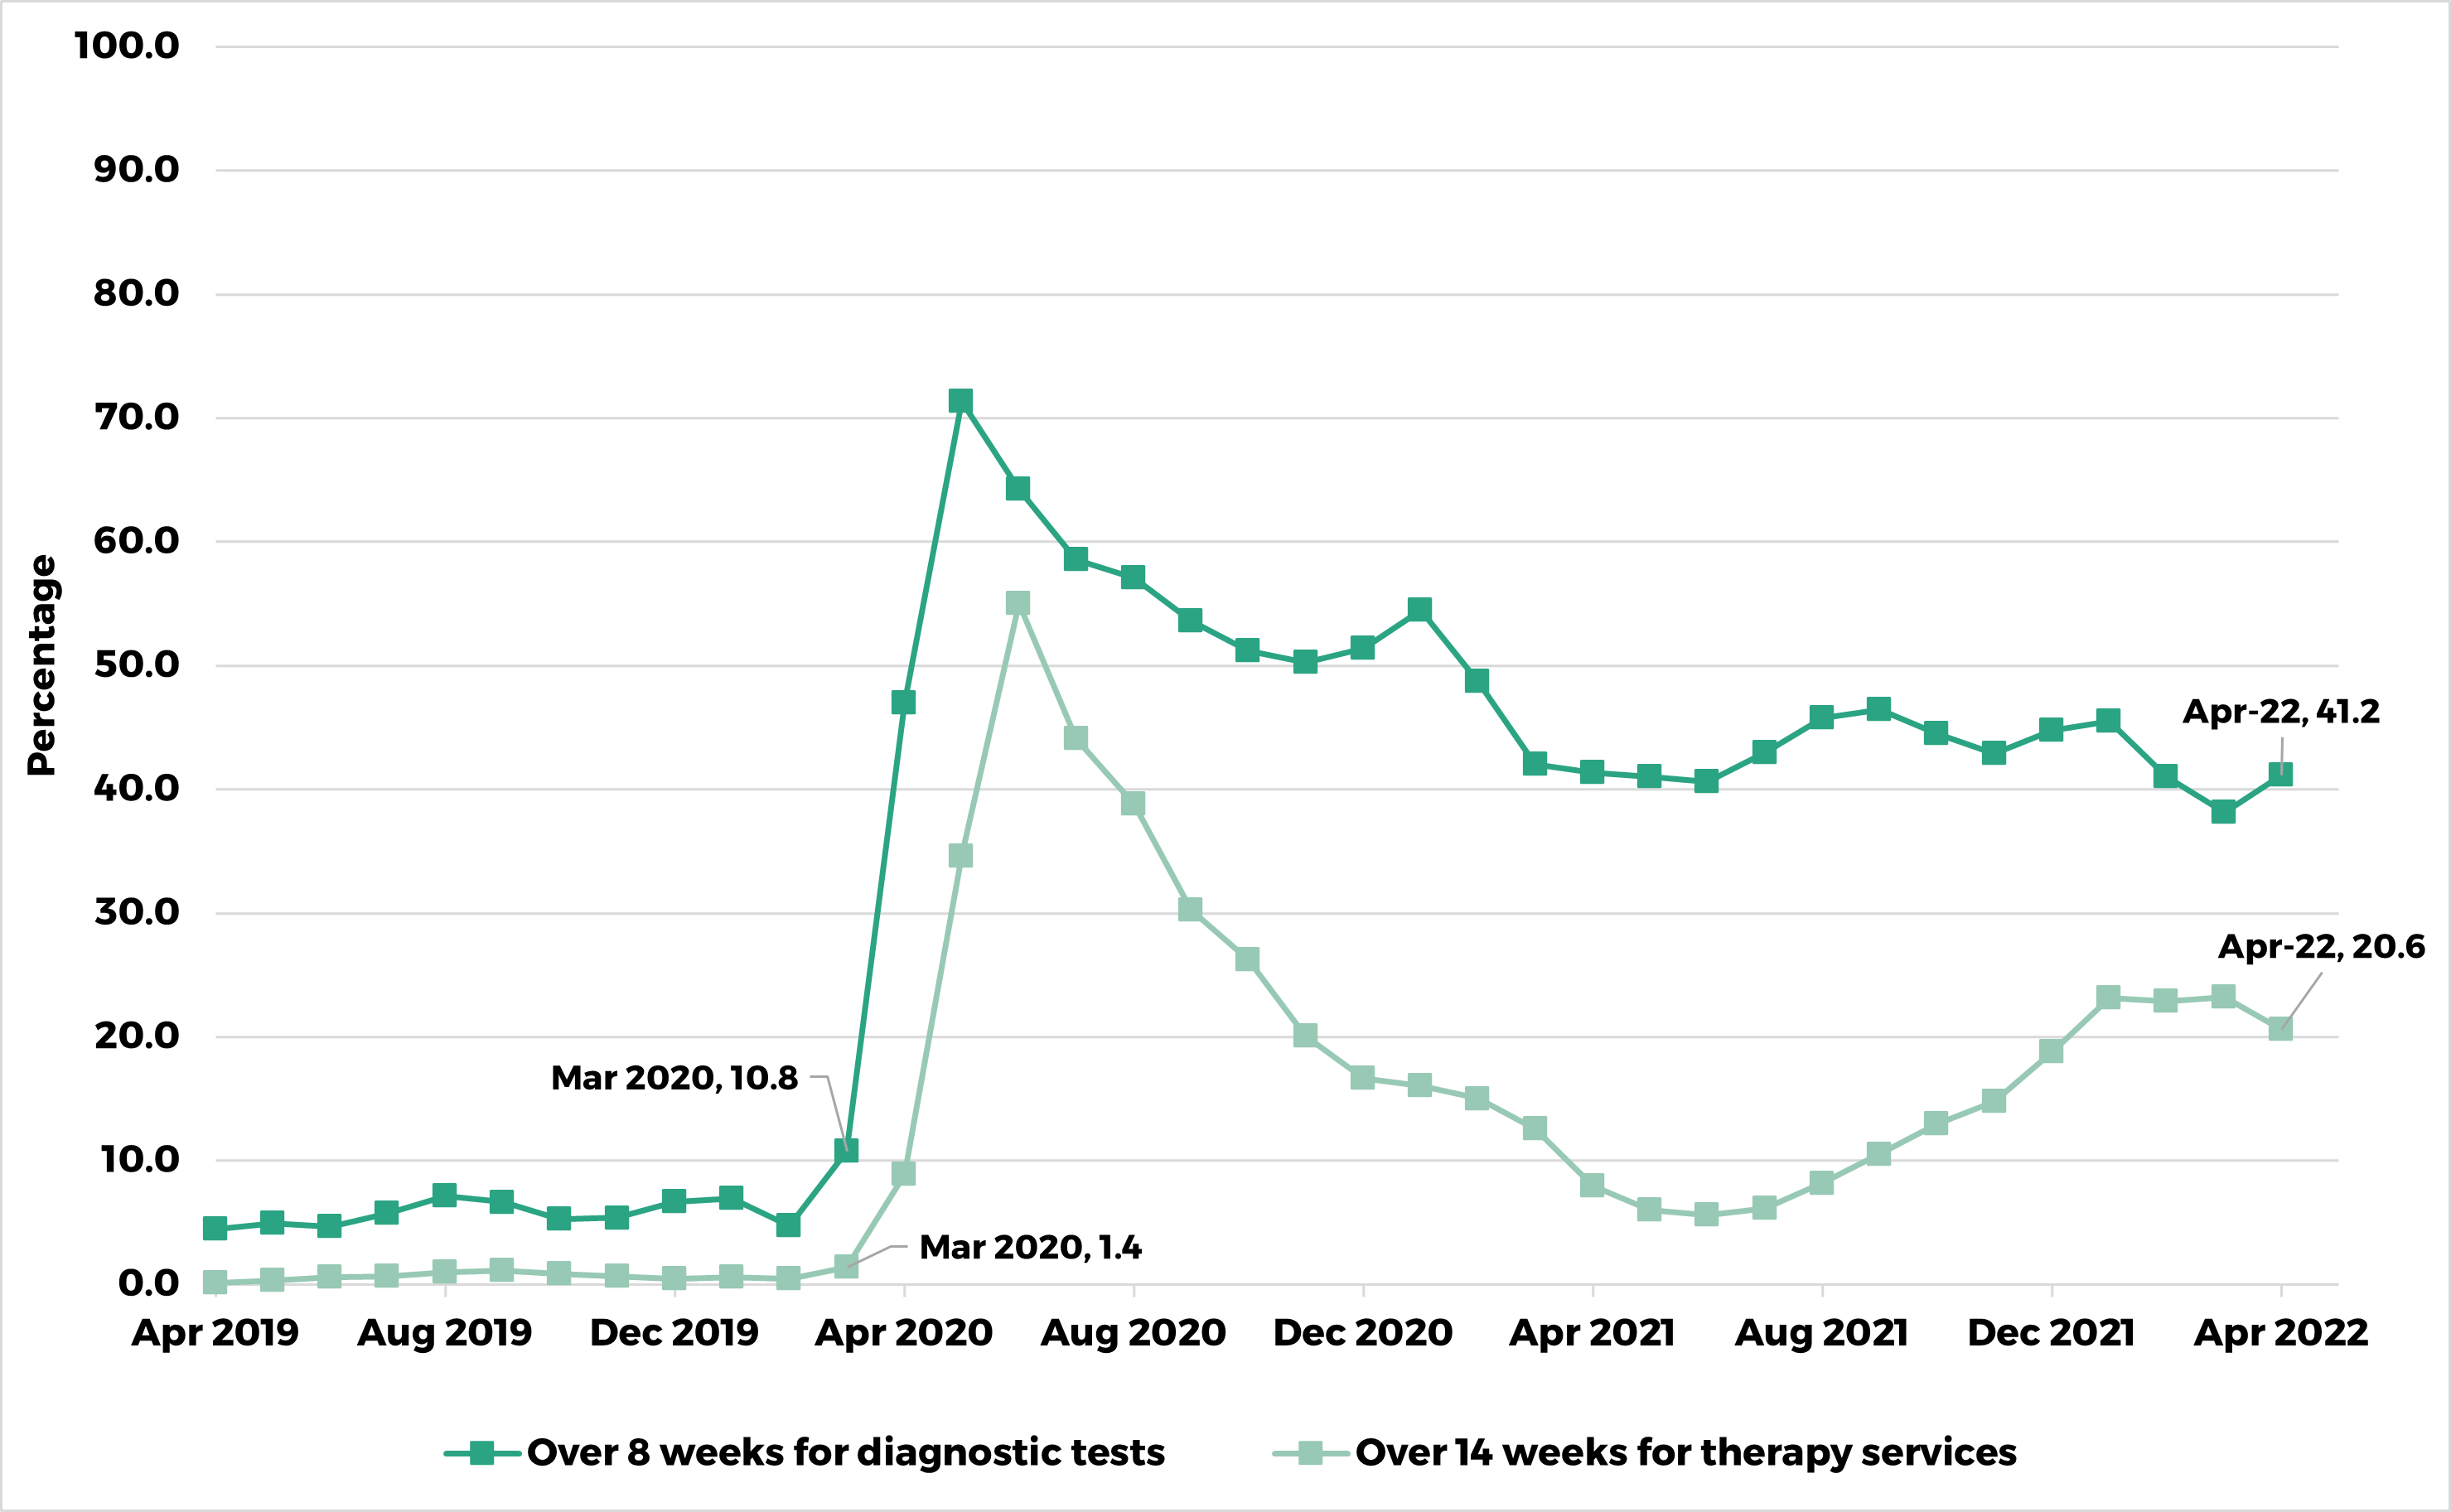 Graph showing the percentage of patients waiting beyond the Welsh Government targets for diagnostic and therapy services. In March 2020, 10.8% of patients were waiting beyond the 8-week target for diagnostics . By April 2022, this had increased to 41.2%. At April 2022, 20.6% of patients were waiting beyond the 14-week target for therapy services, compared to with 1.4% at March 2020.